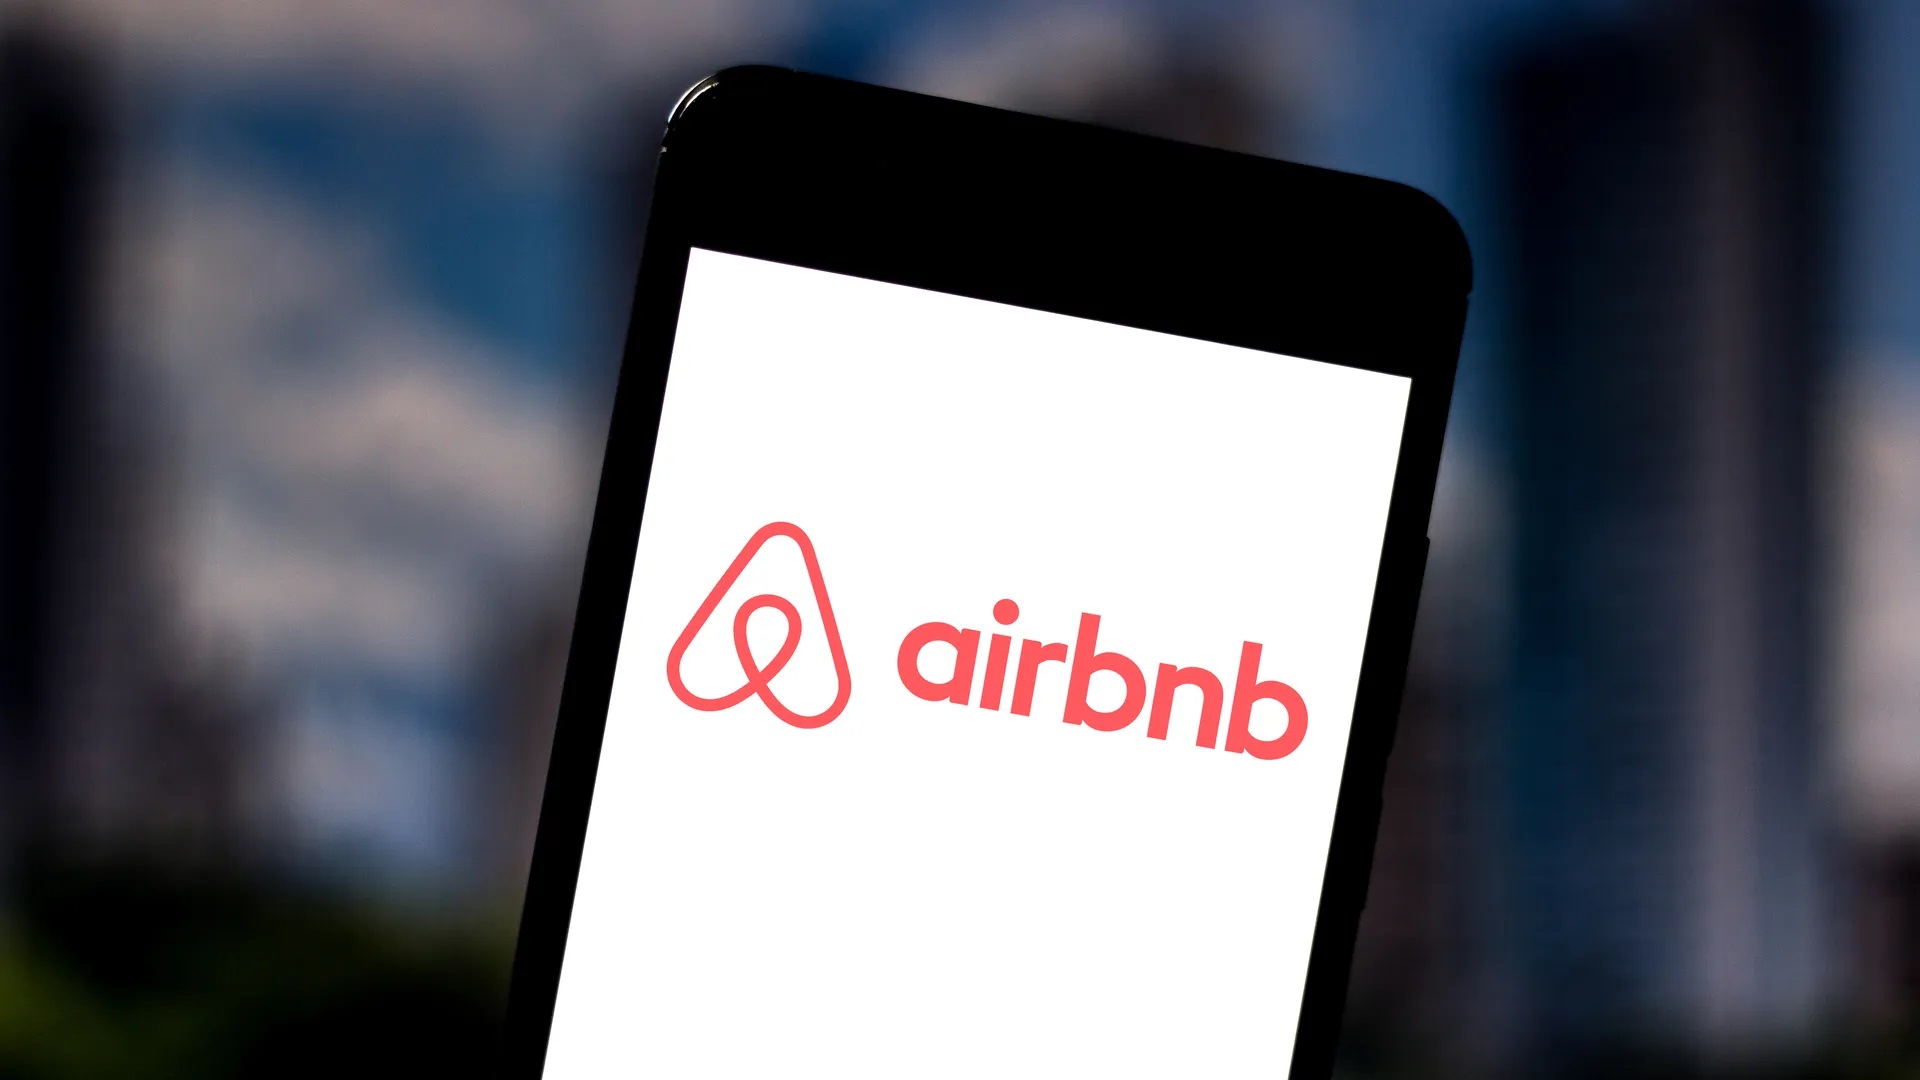 How to Add an Airbnb Reservation to Your iPhone Calendar TouristSecrets